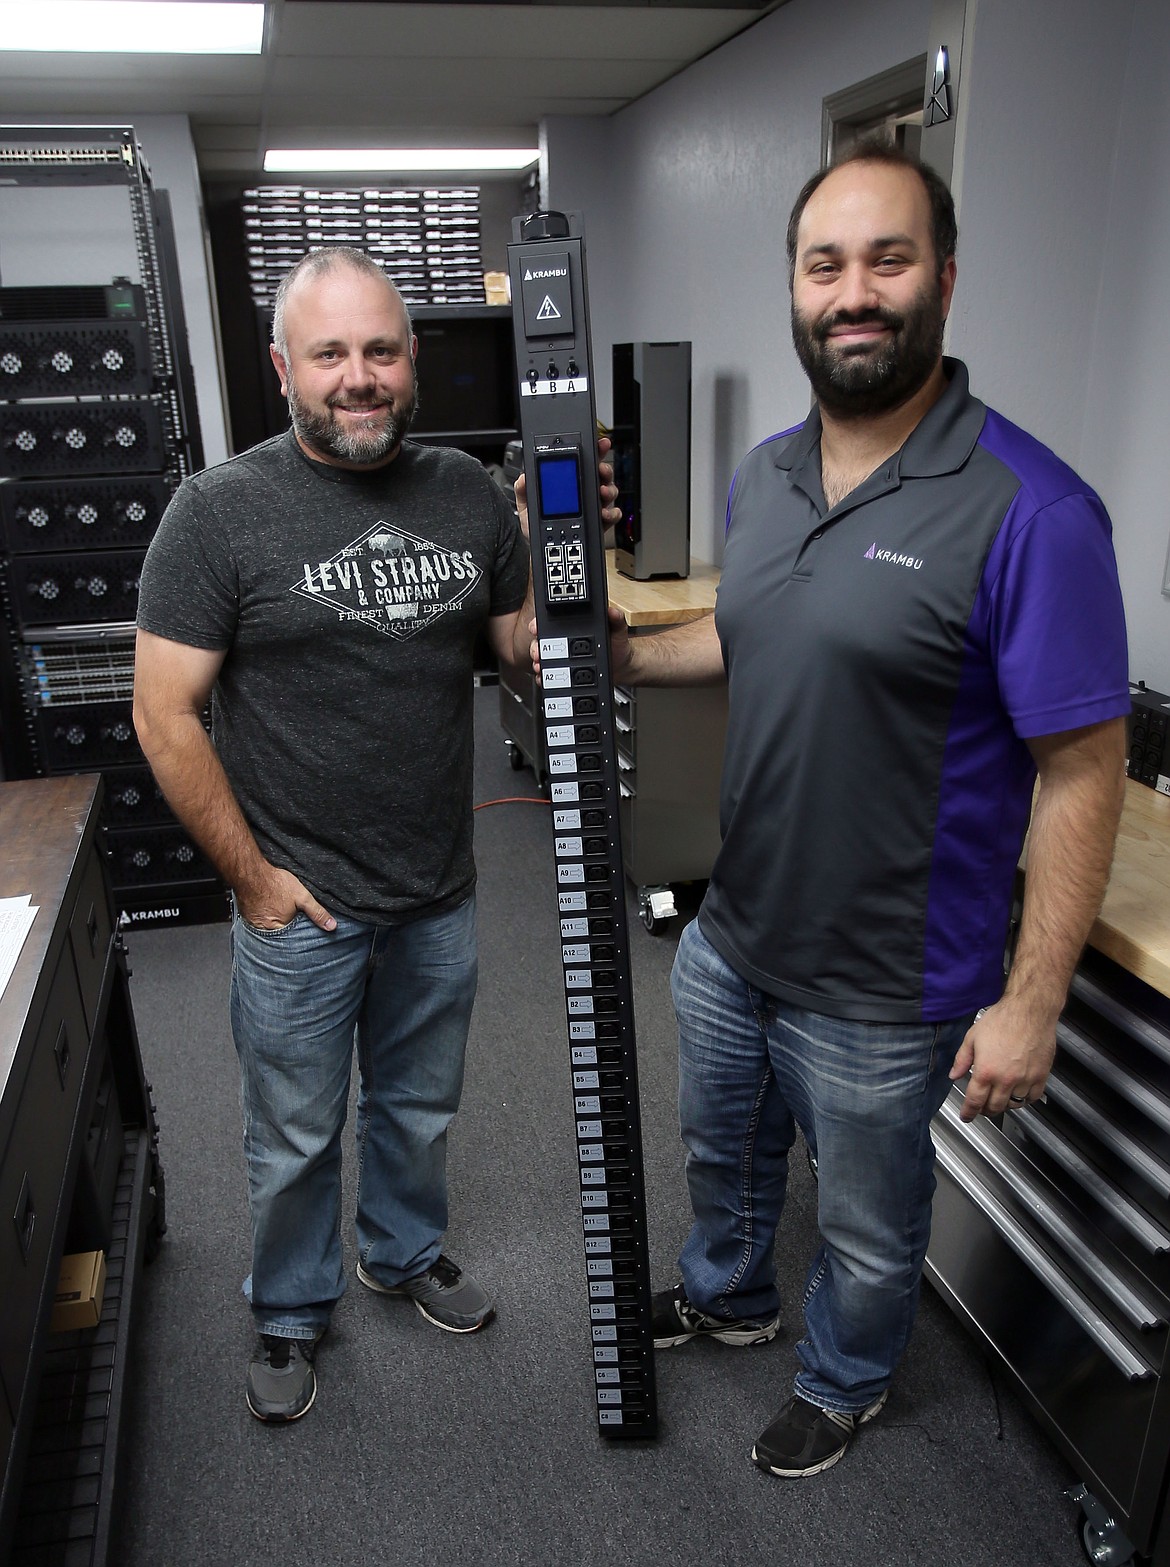 Lawrence Sowell and Travis Jank show off Krambu&#146;s new blockchain power distribution unit at their R&amp;D lab in Coeur d&#146;Alene. (JUDD WILSON/Press)